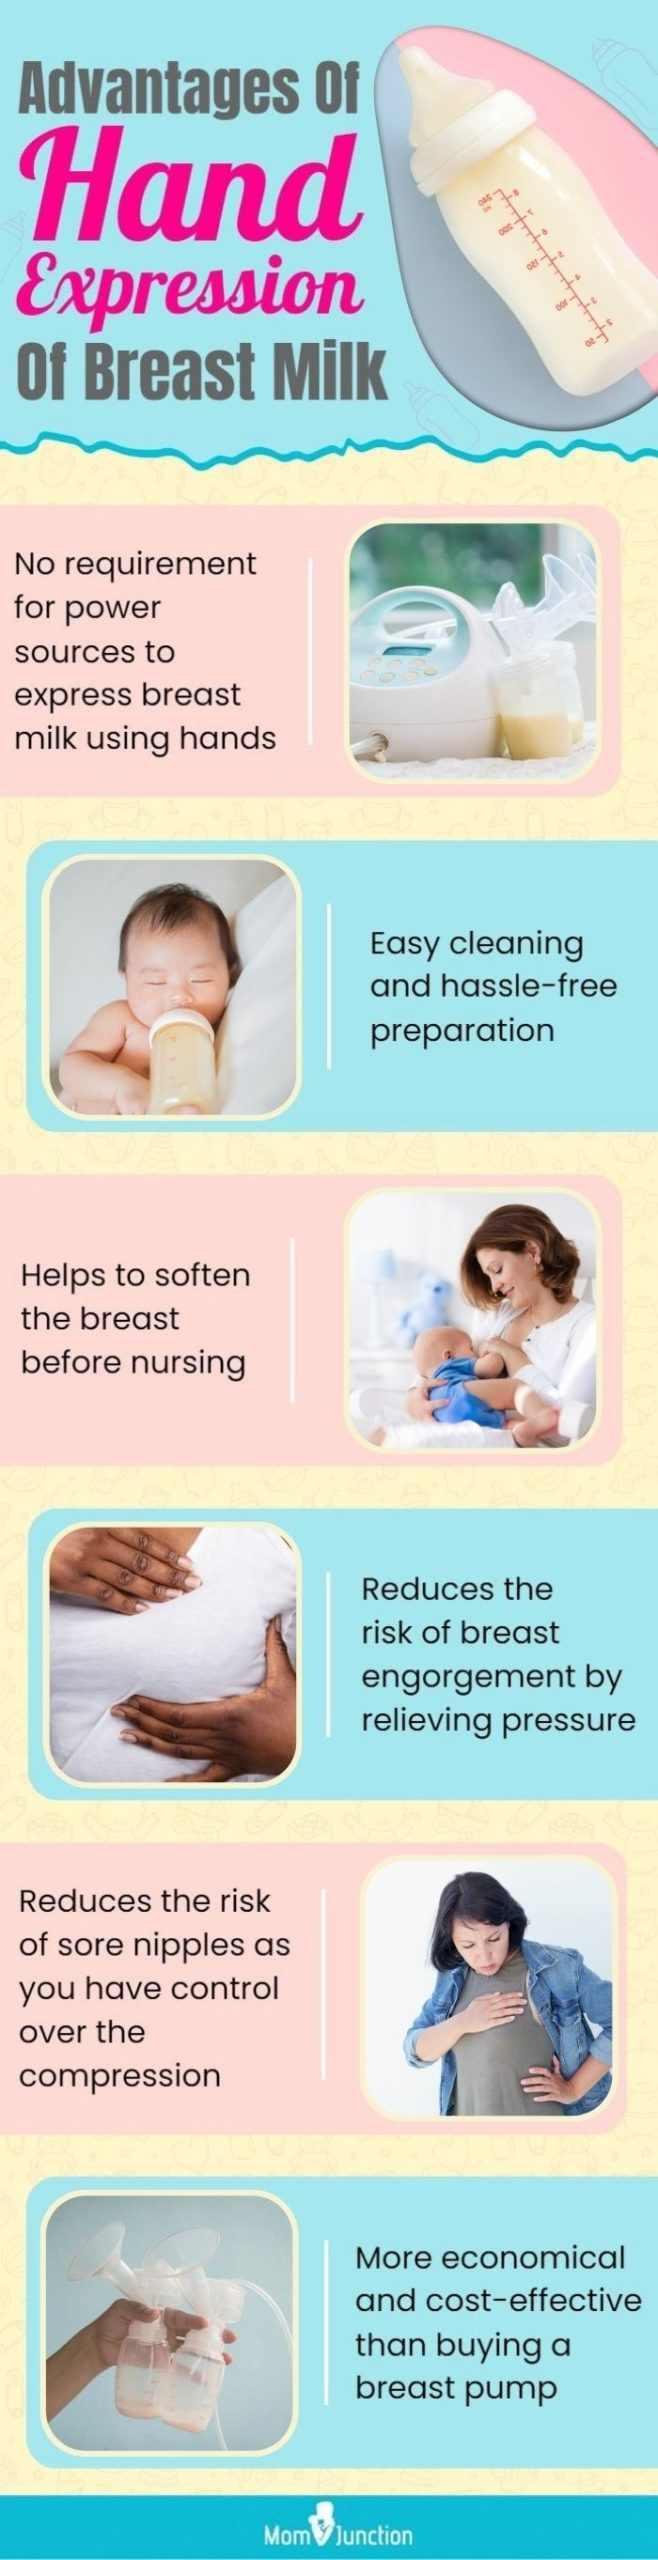 https://www.momjunction.com/wp-content/uploads/2014/10/Advantages-Of-Hand-Expression-Of-Breast-Milk-scaled.jpg